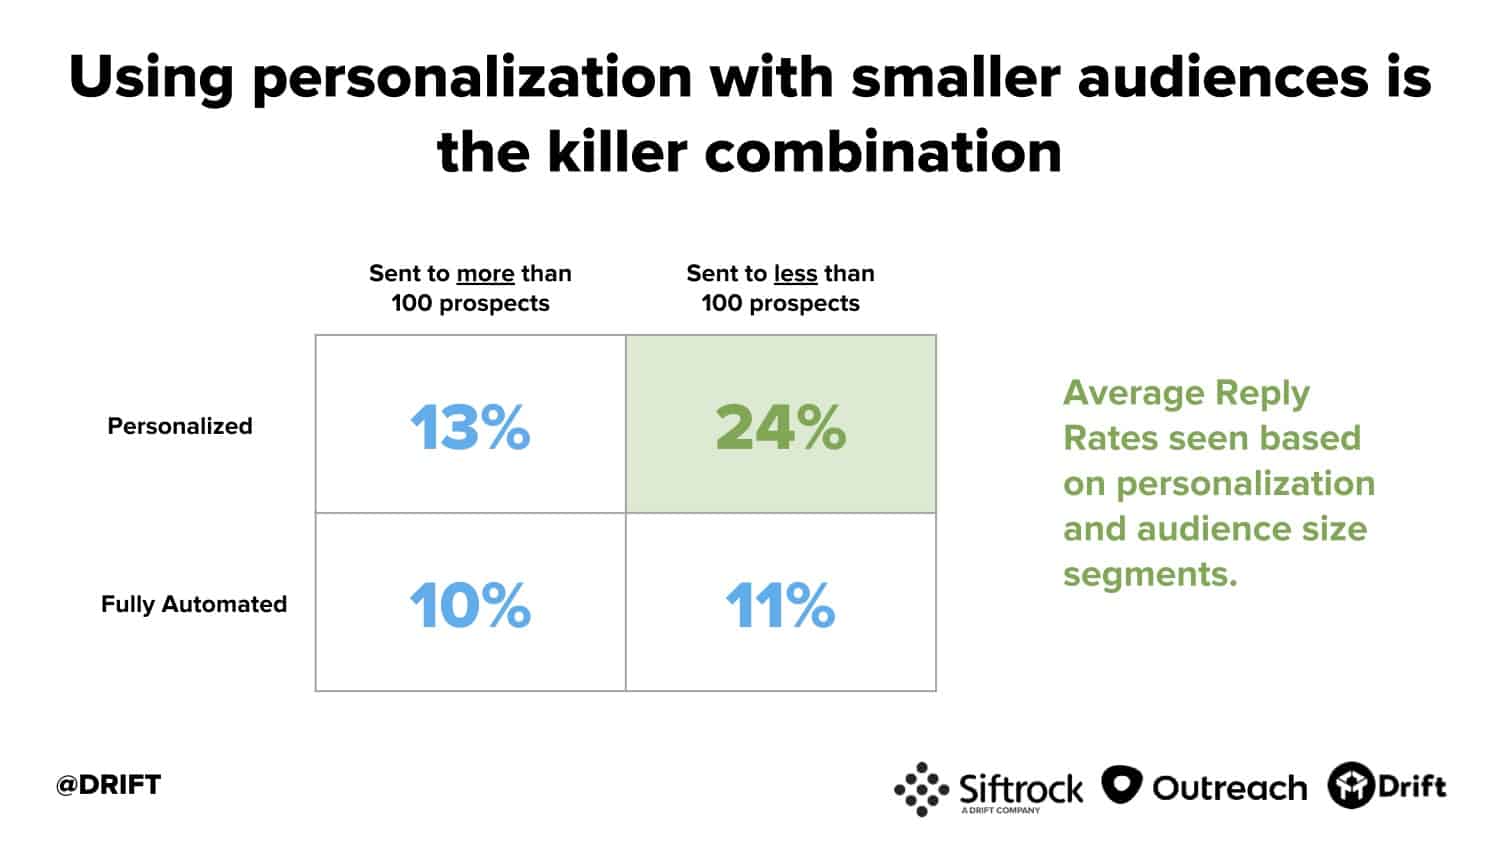 Drift cold email study personalization and smaller audience